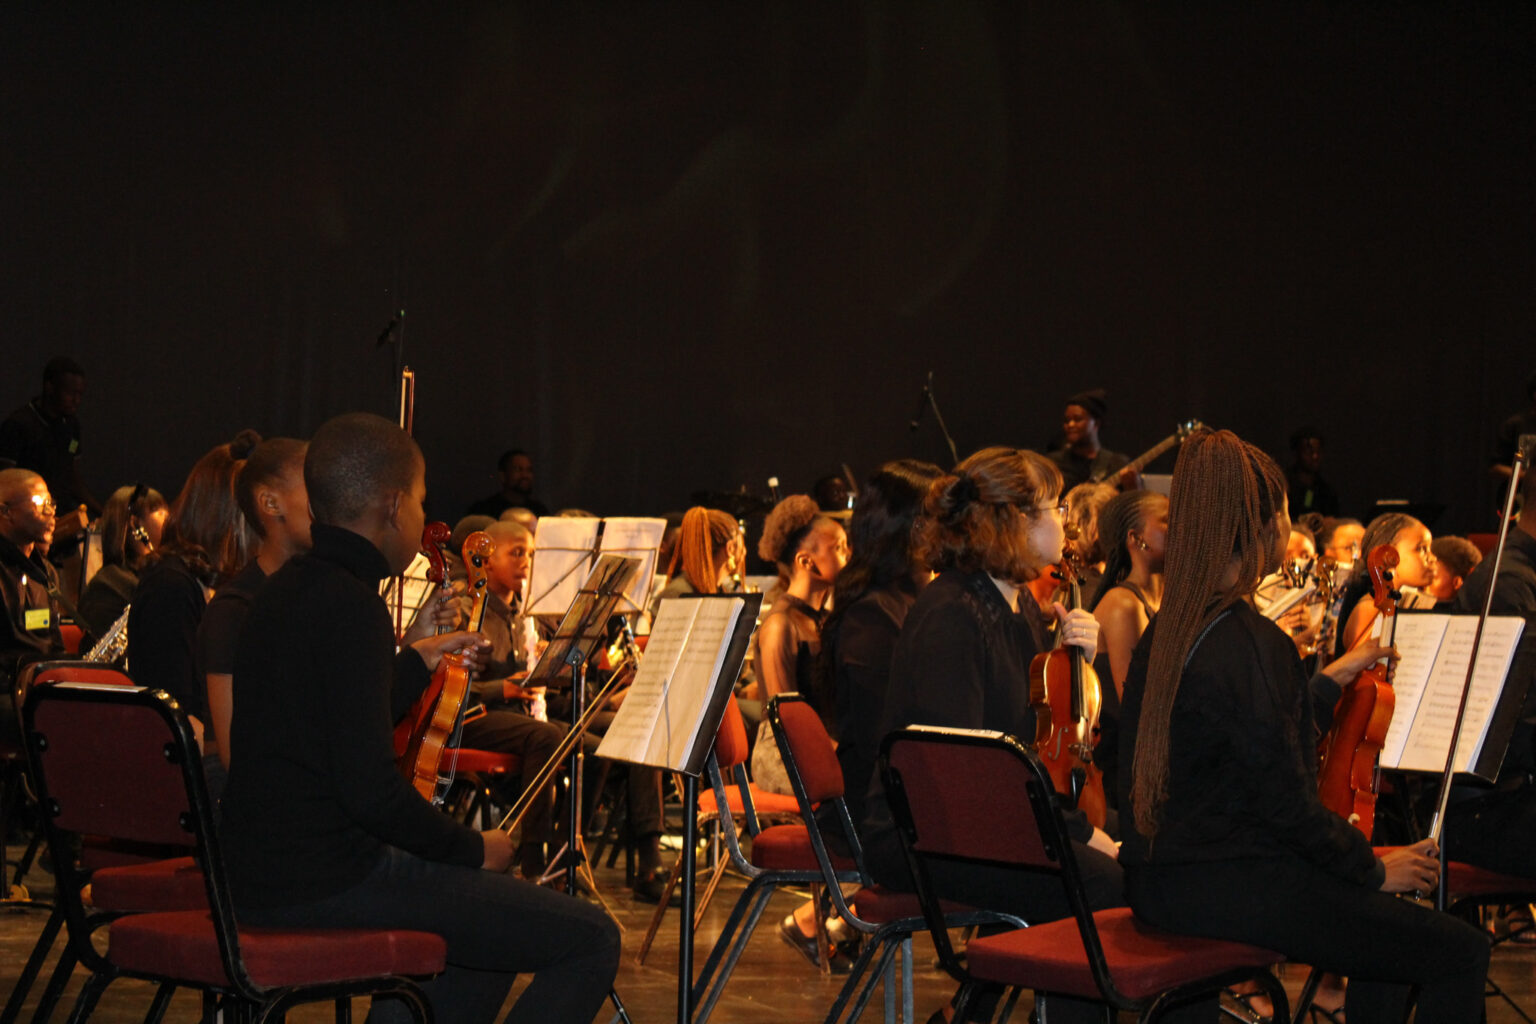 Young musicians ready to set the stage alight at the Iimbewu Youth Orchestra event. Photo: Malikhanye Mankayi